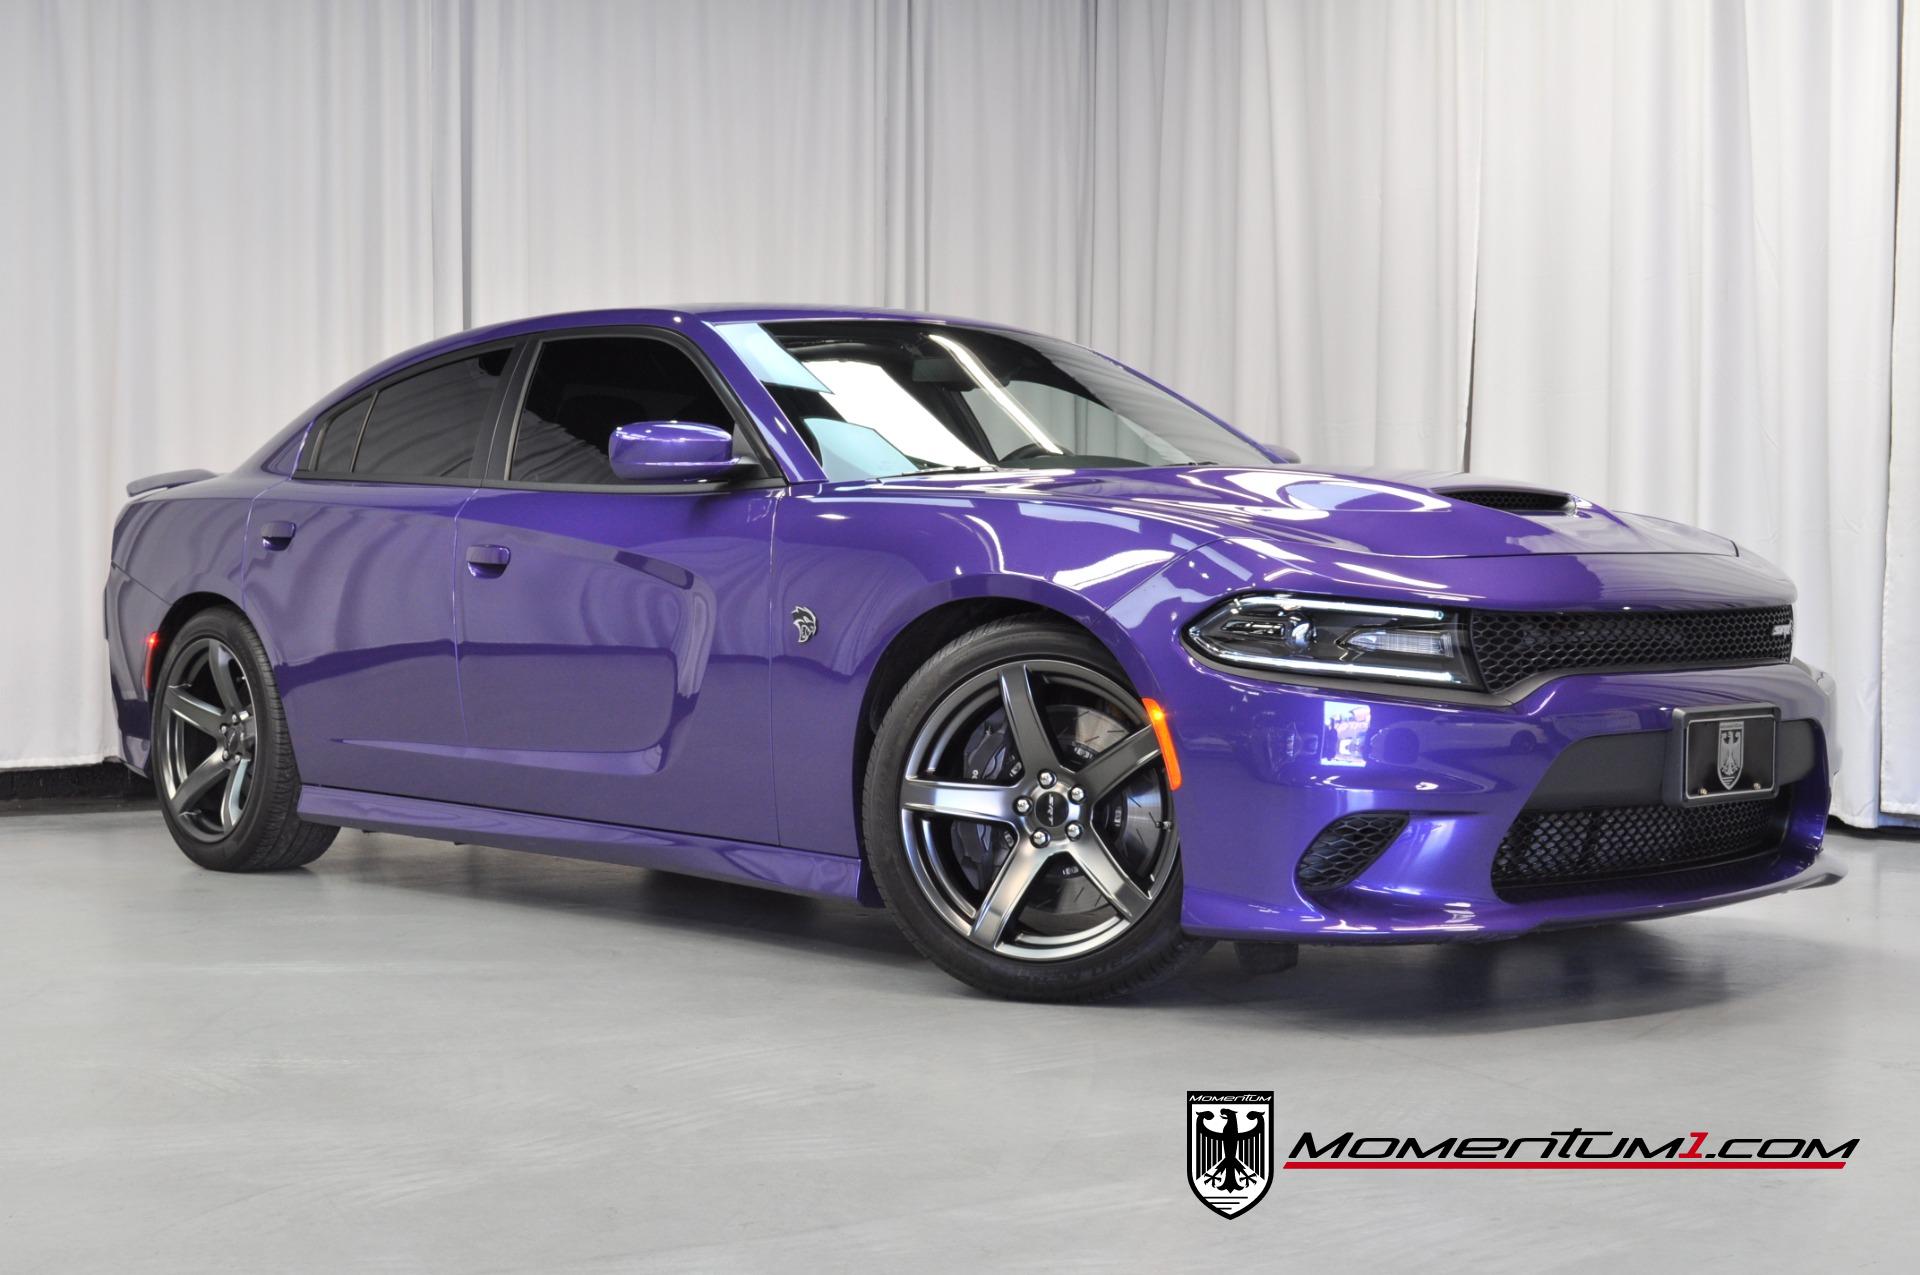 Used 2018 Dodge Charger SRT Hellcat 1638384519 